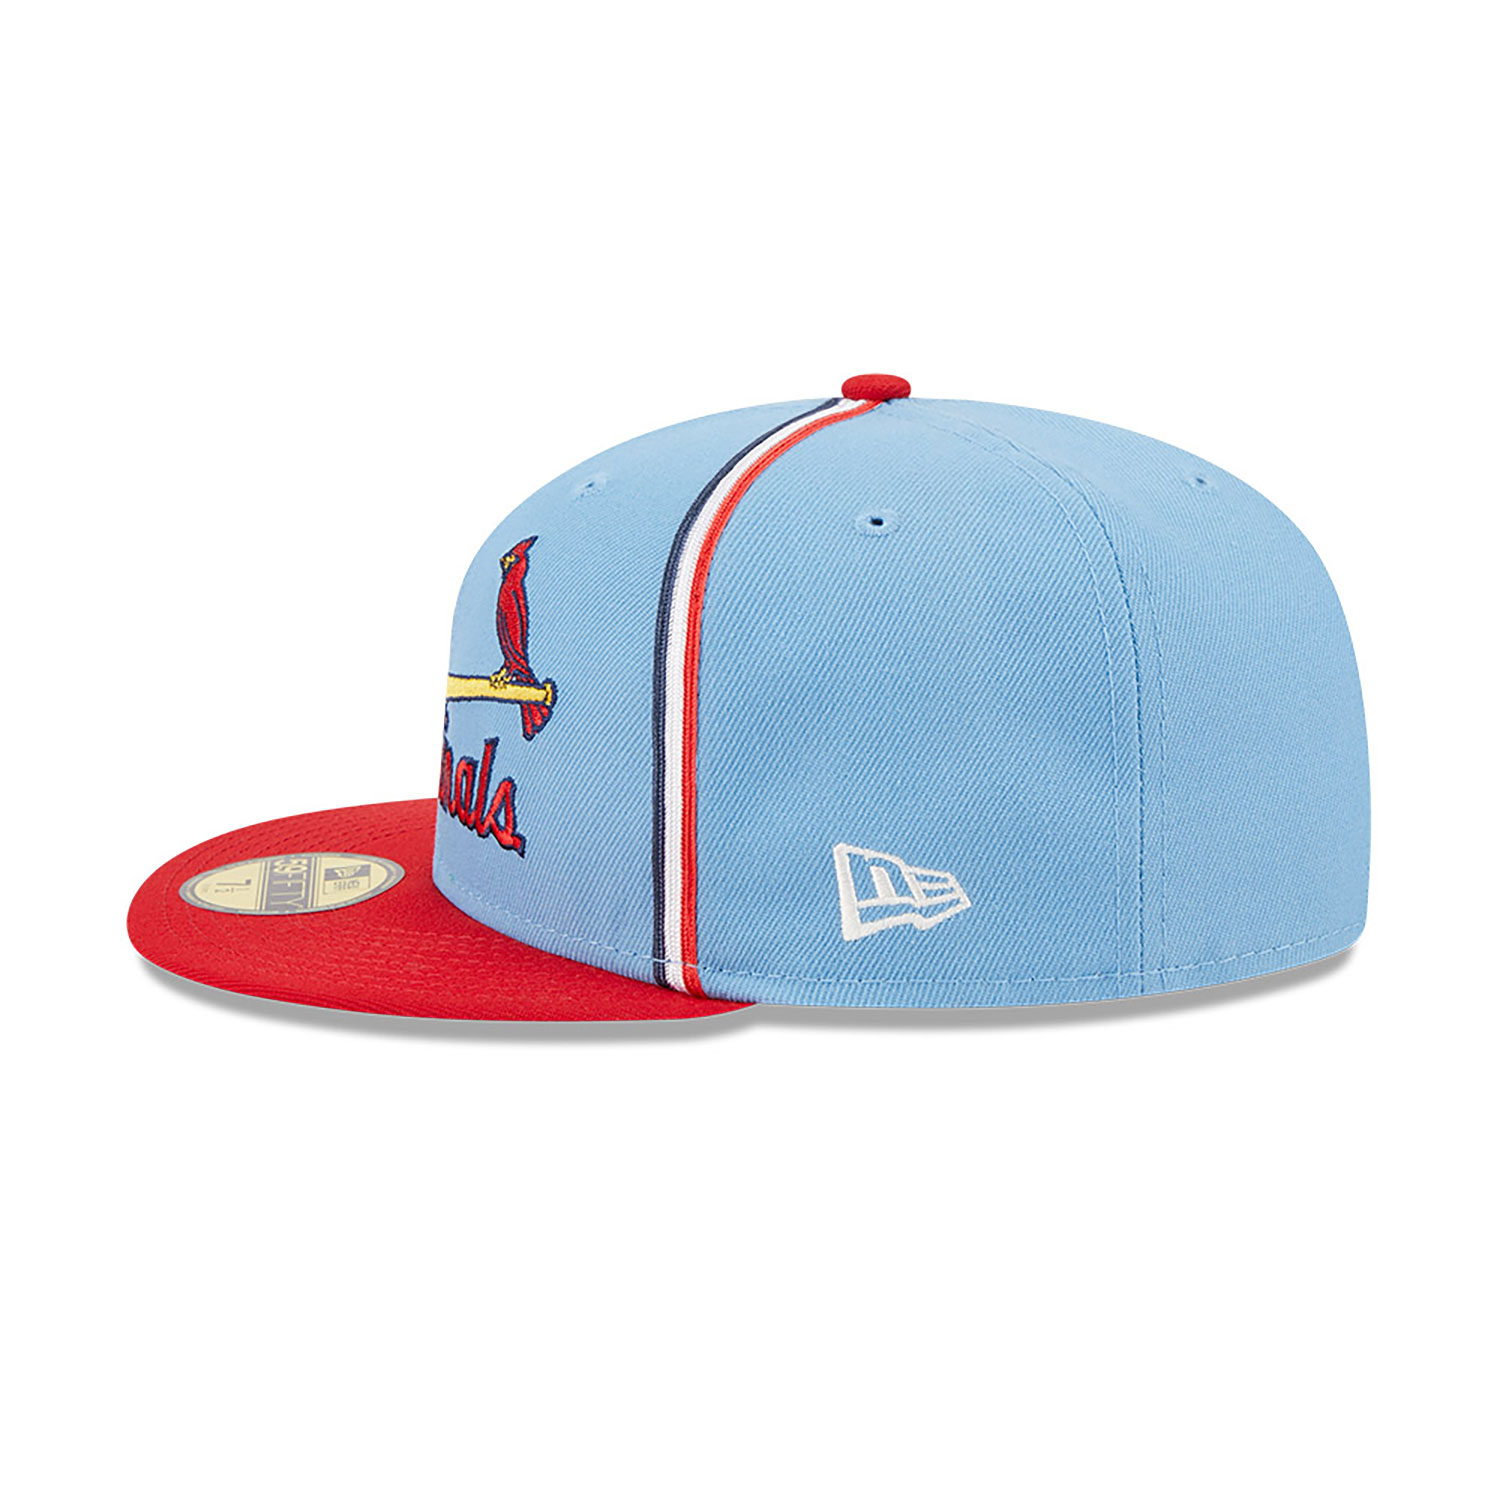 St. Louis Cardinals: The return of the powder blues to St. Louis